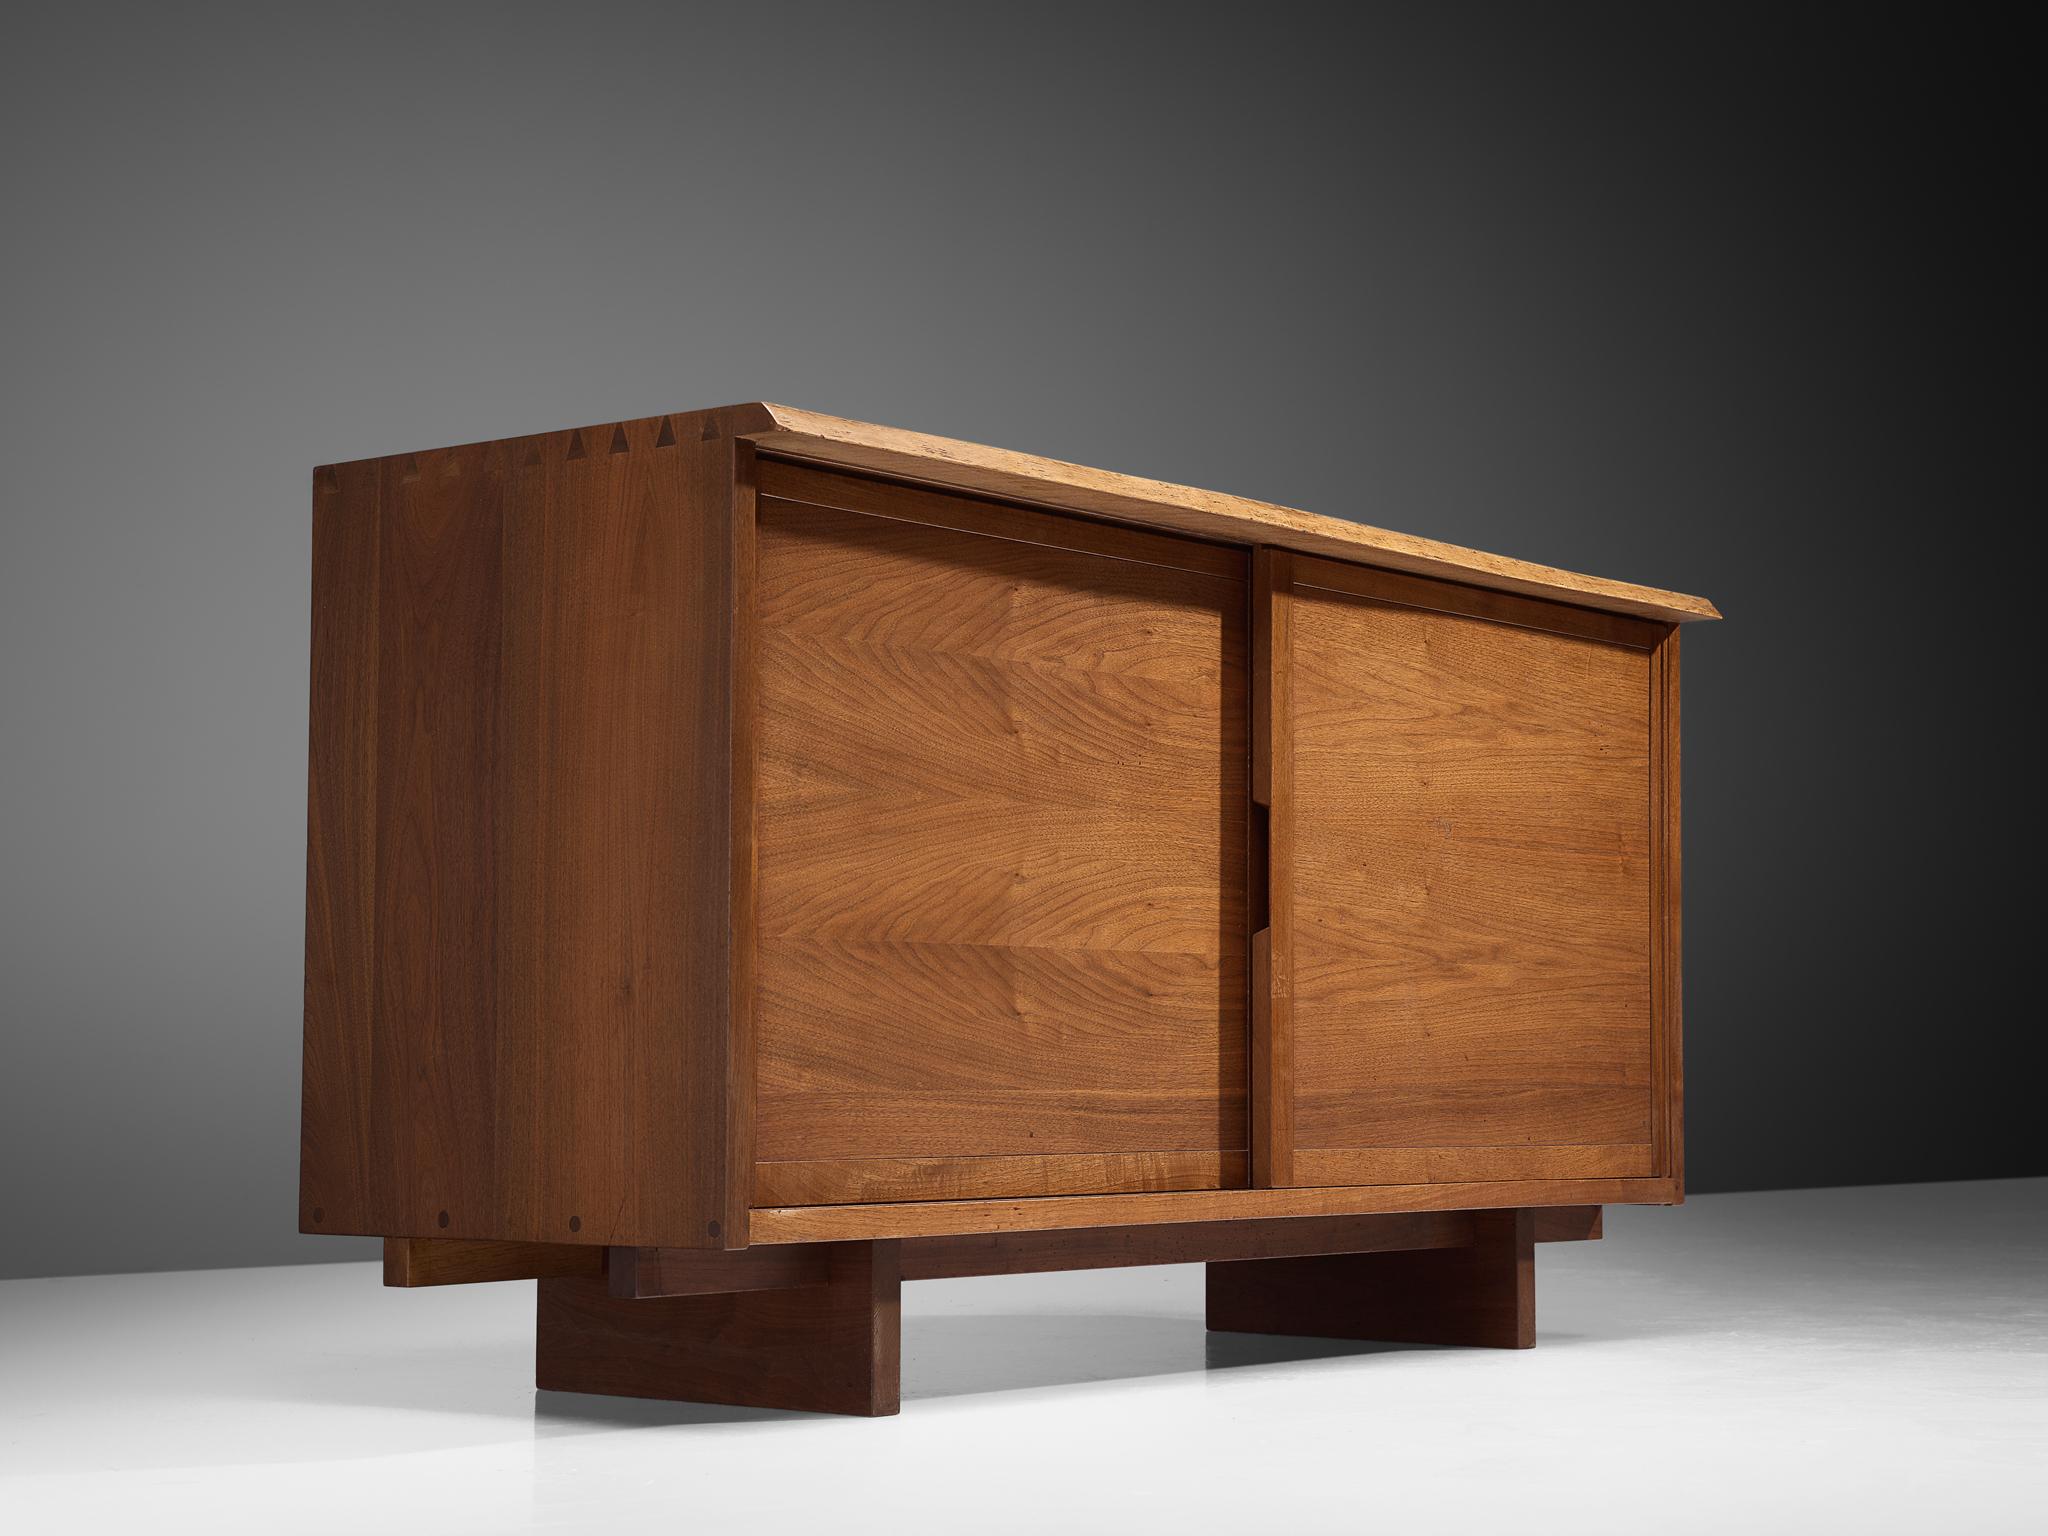 George Nakashima, sideboard, American walnut, New Hope, PA, 1959

Beautiful cabinet by George Nakashima with two sliding doors. The sideboard features the great details of Nakashimas craftsmanship like the wooden connections visible on top. Two